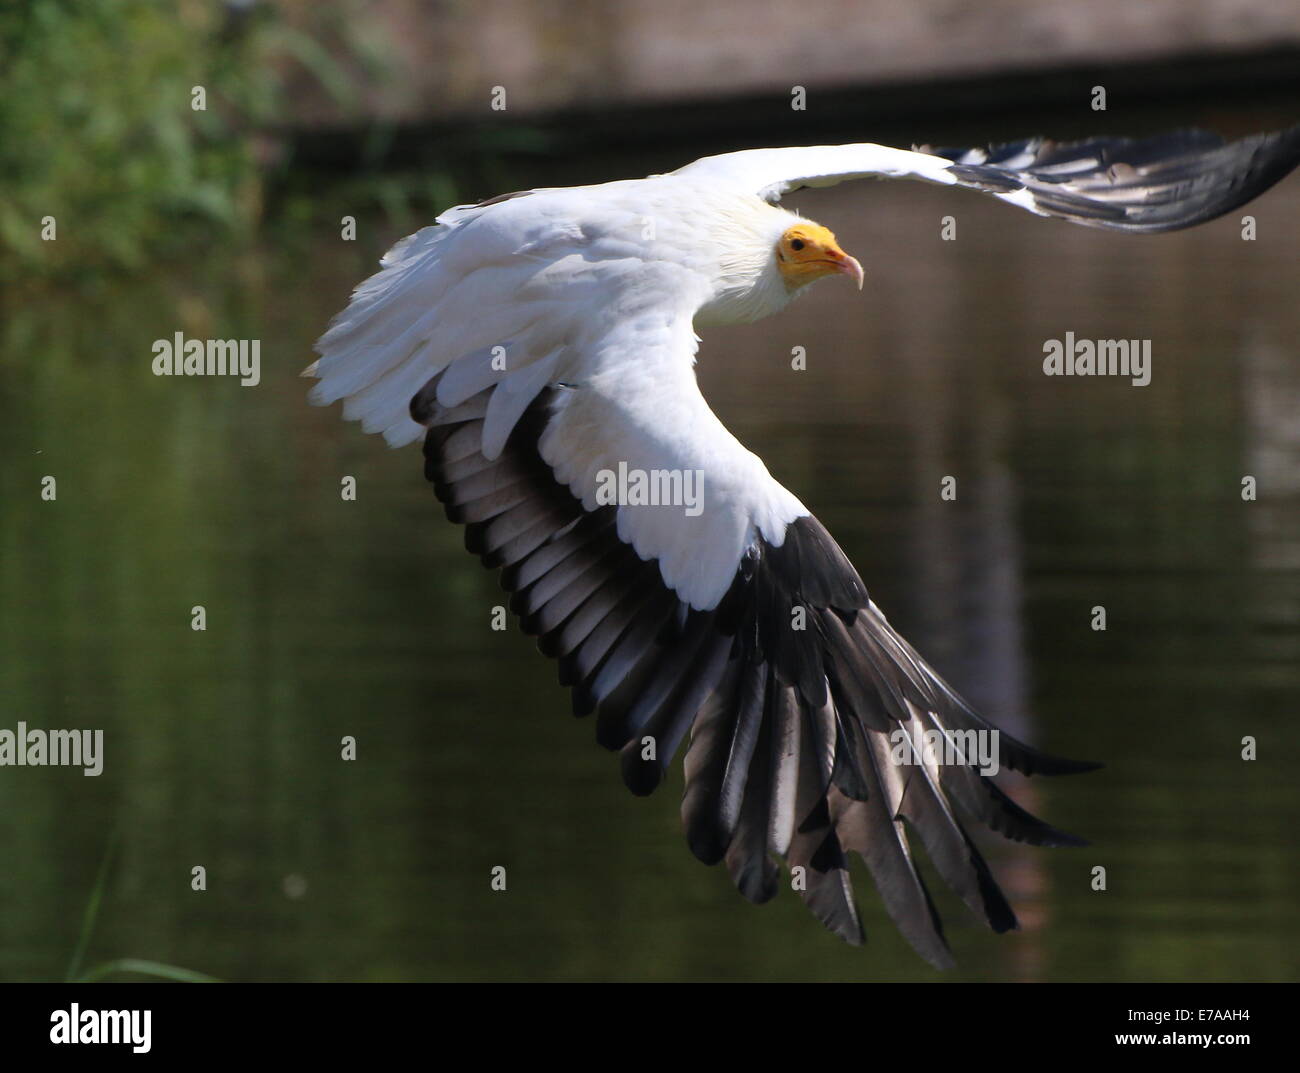 Egyptian vulture or white scavenger vulture (Neophron percnopterus) in flight Stock Photo